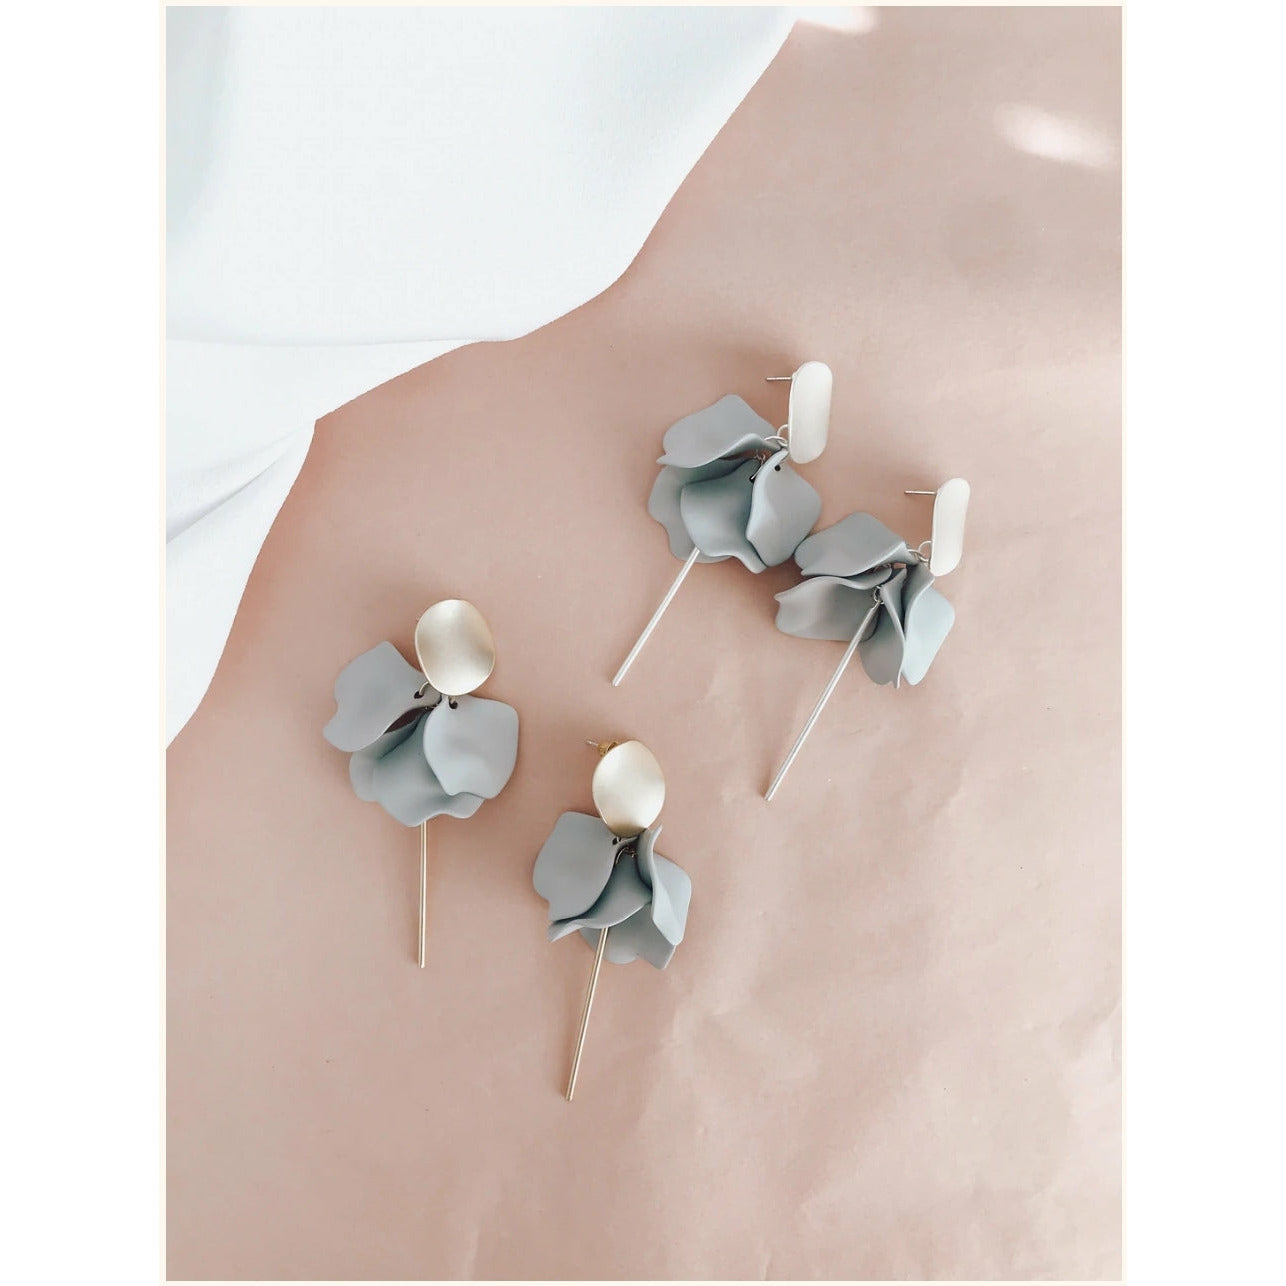 Flora Dangles Earrings | Willow Collective The Willow Collective